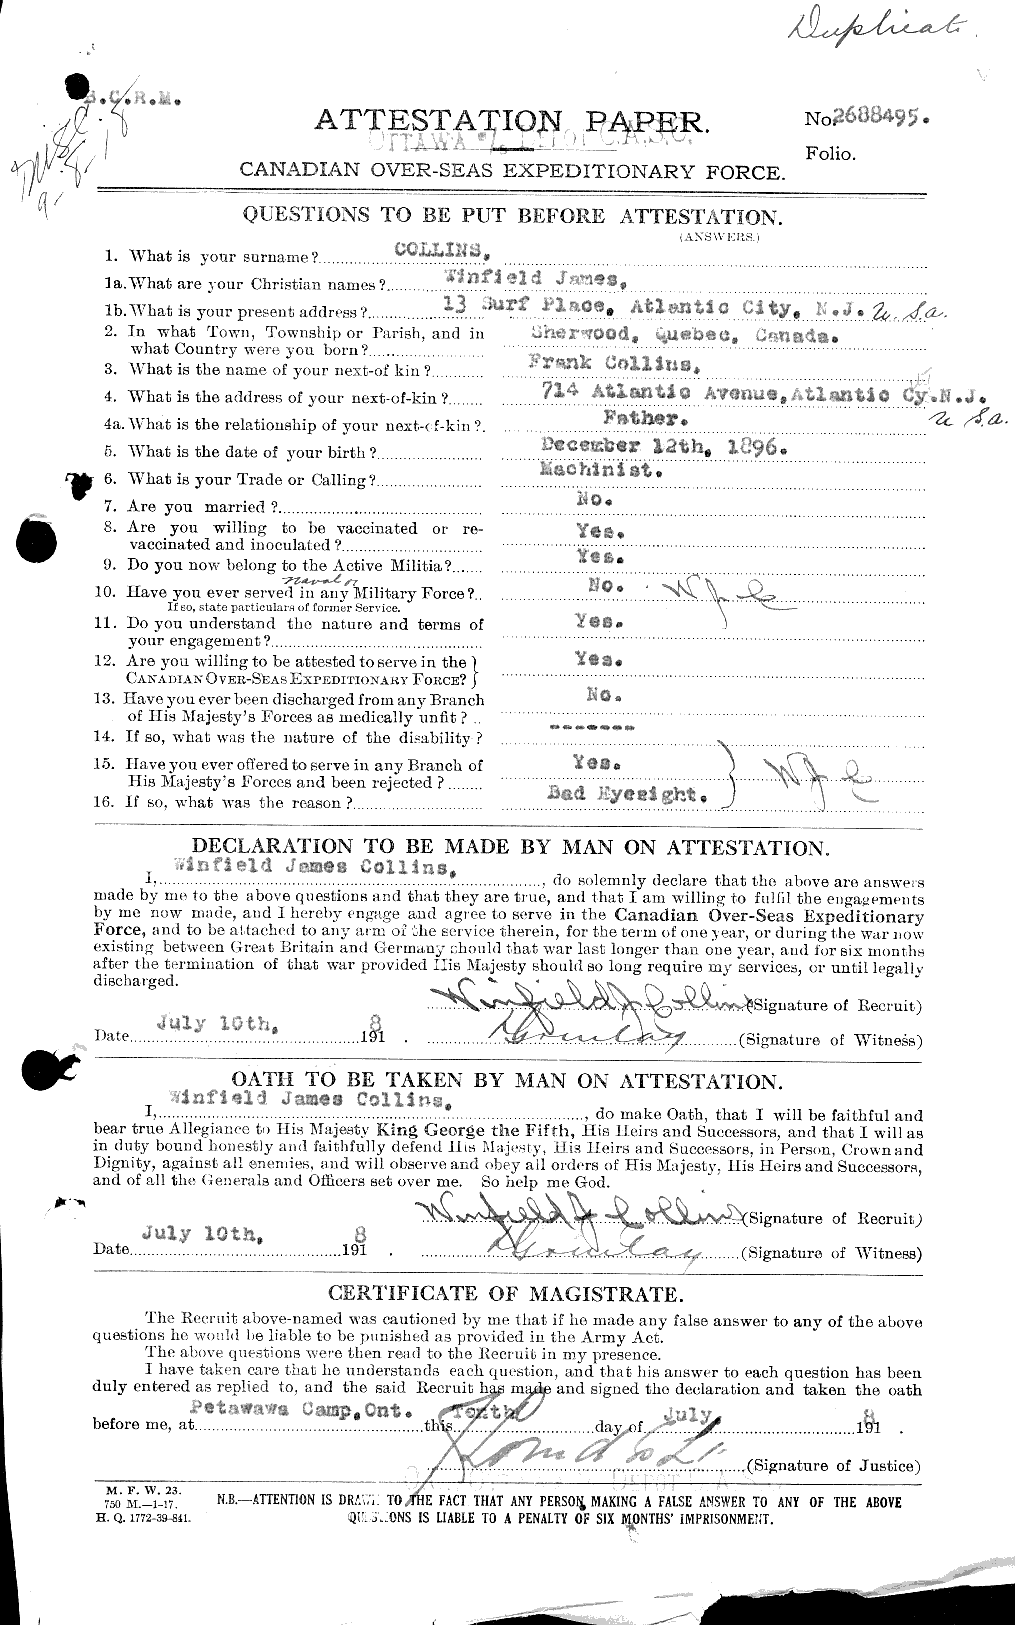 Personnel Records of the First World War - CEF 034640a